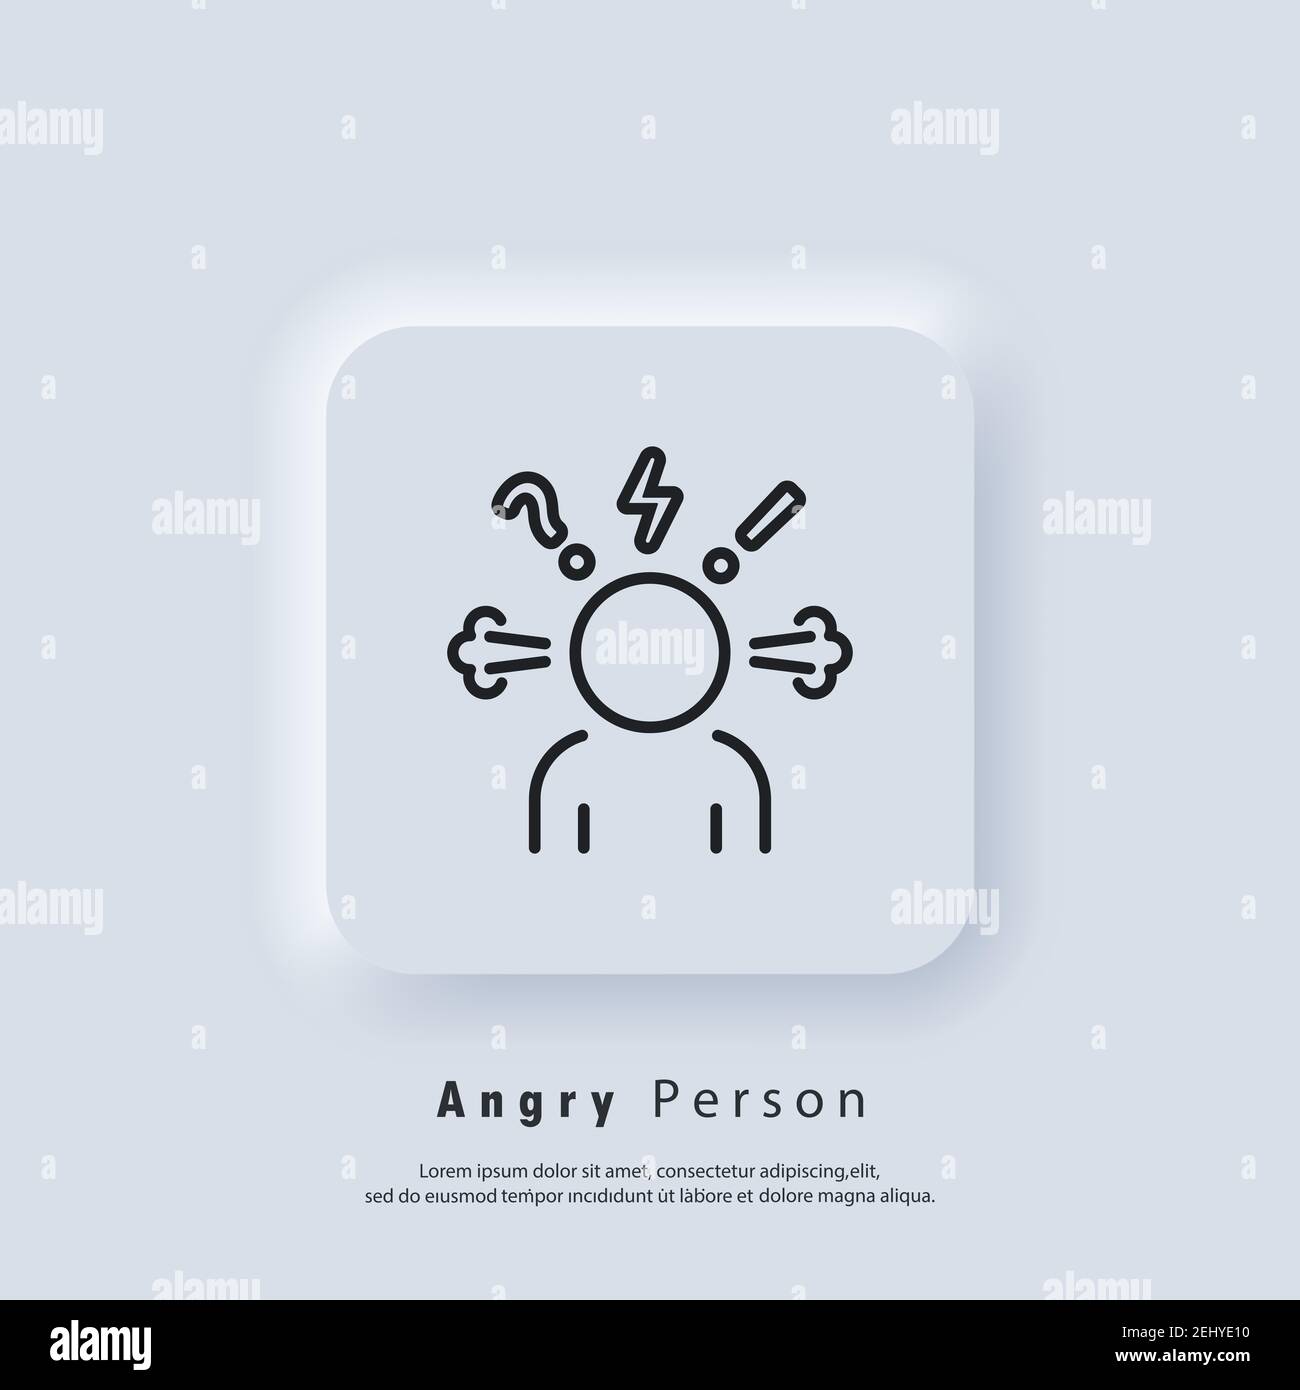 Angry Person icon. Headache glyph icon. Anger and irritation. Frustration. Aggression icons. Occupational stress. Emotional stress symptom. Nervous te Stock Vector